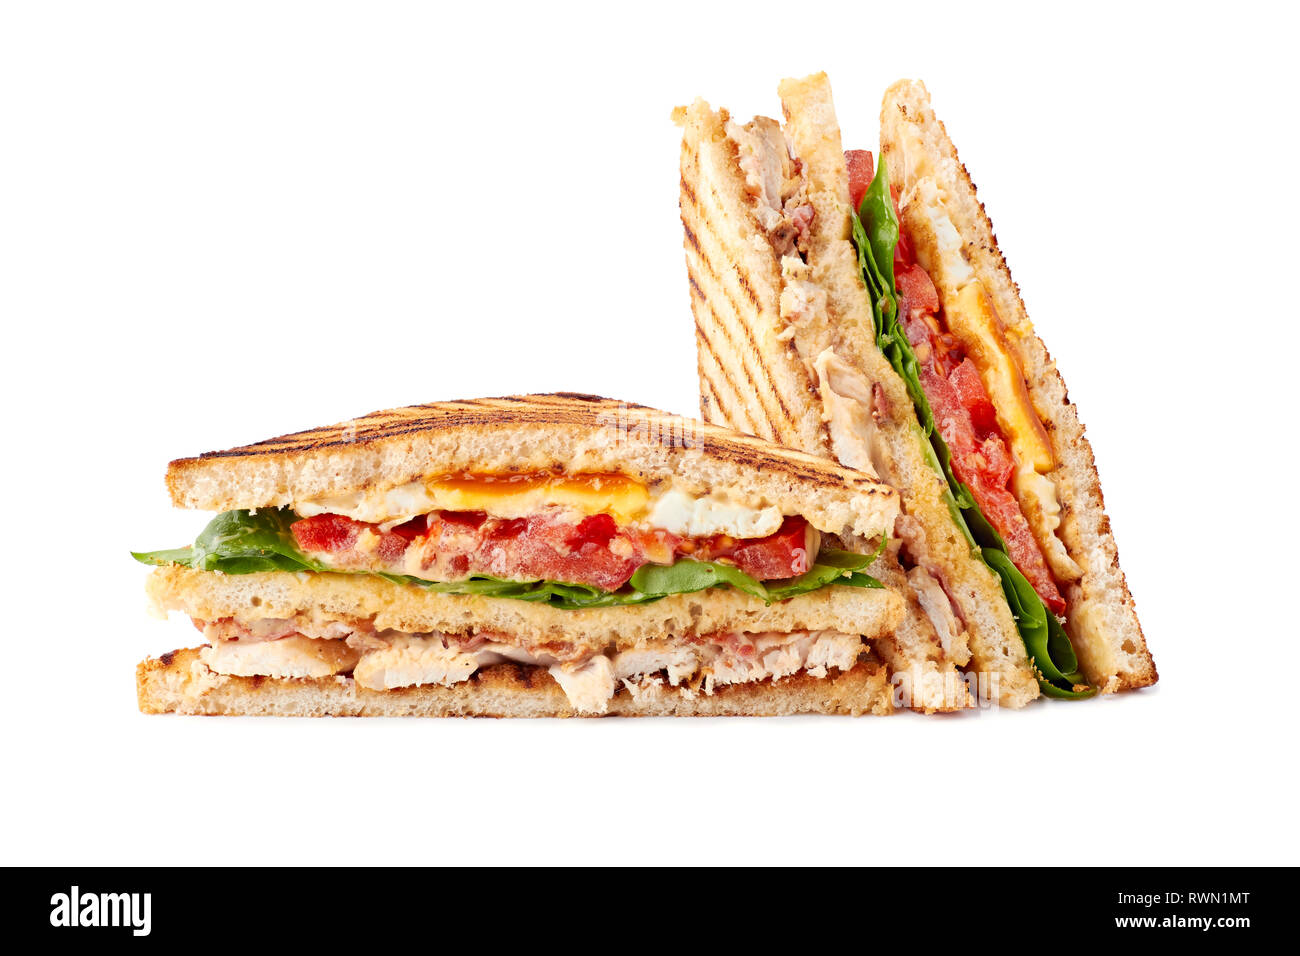 Delicious sliced club sandwich on white background Stock Photo - Alamy